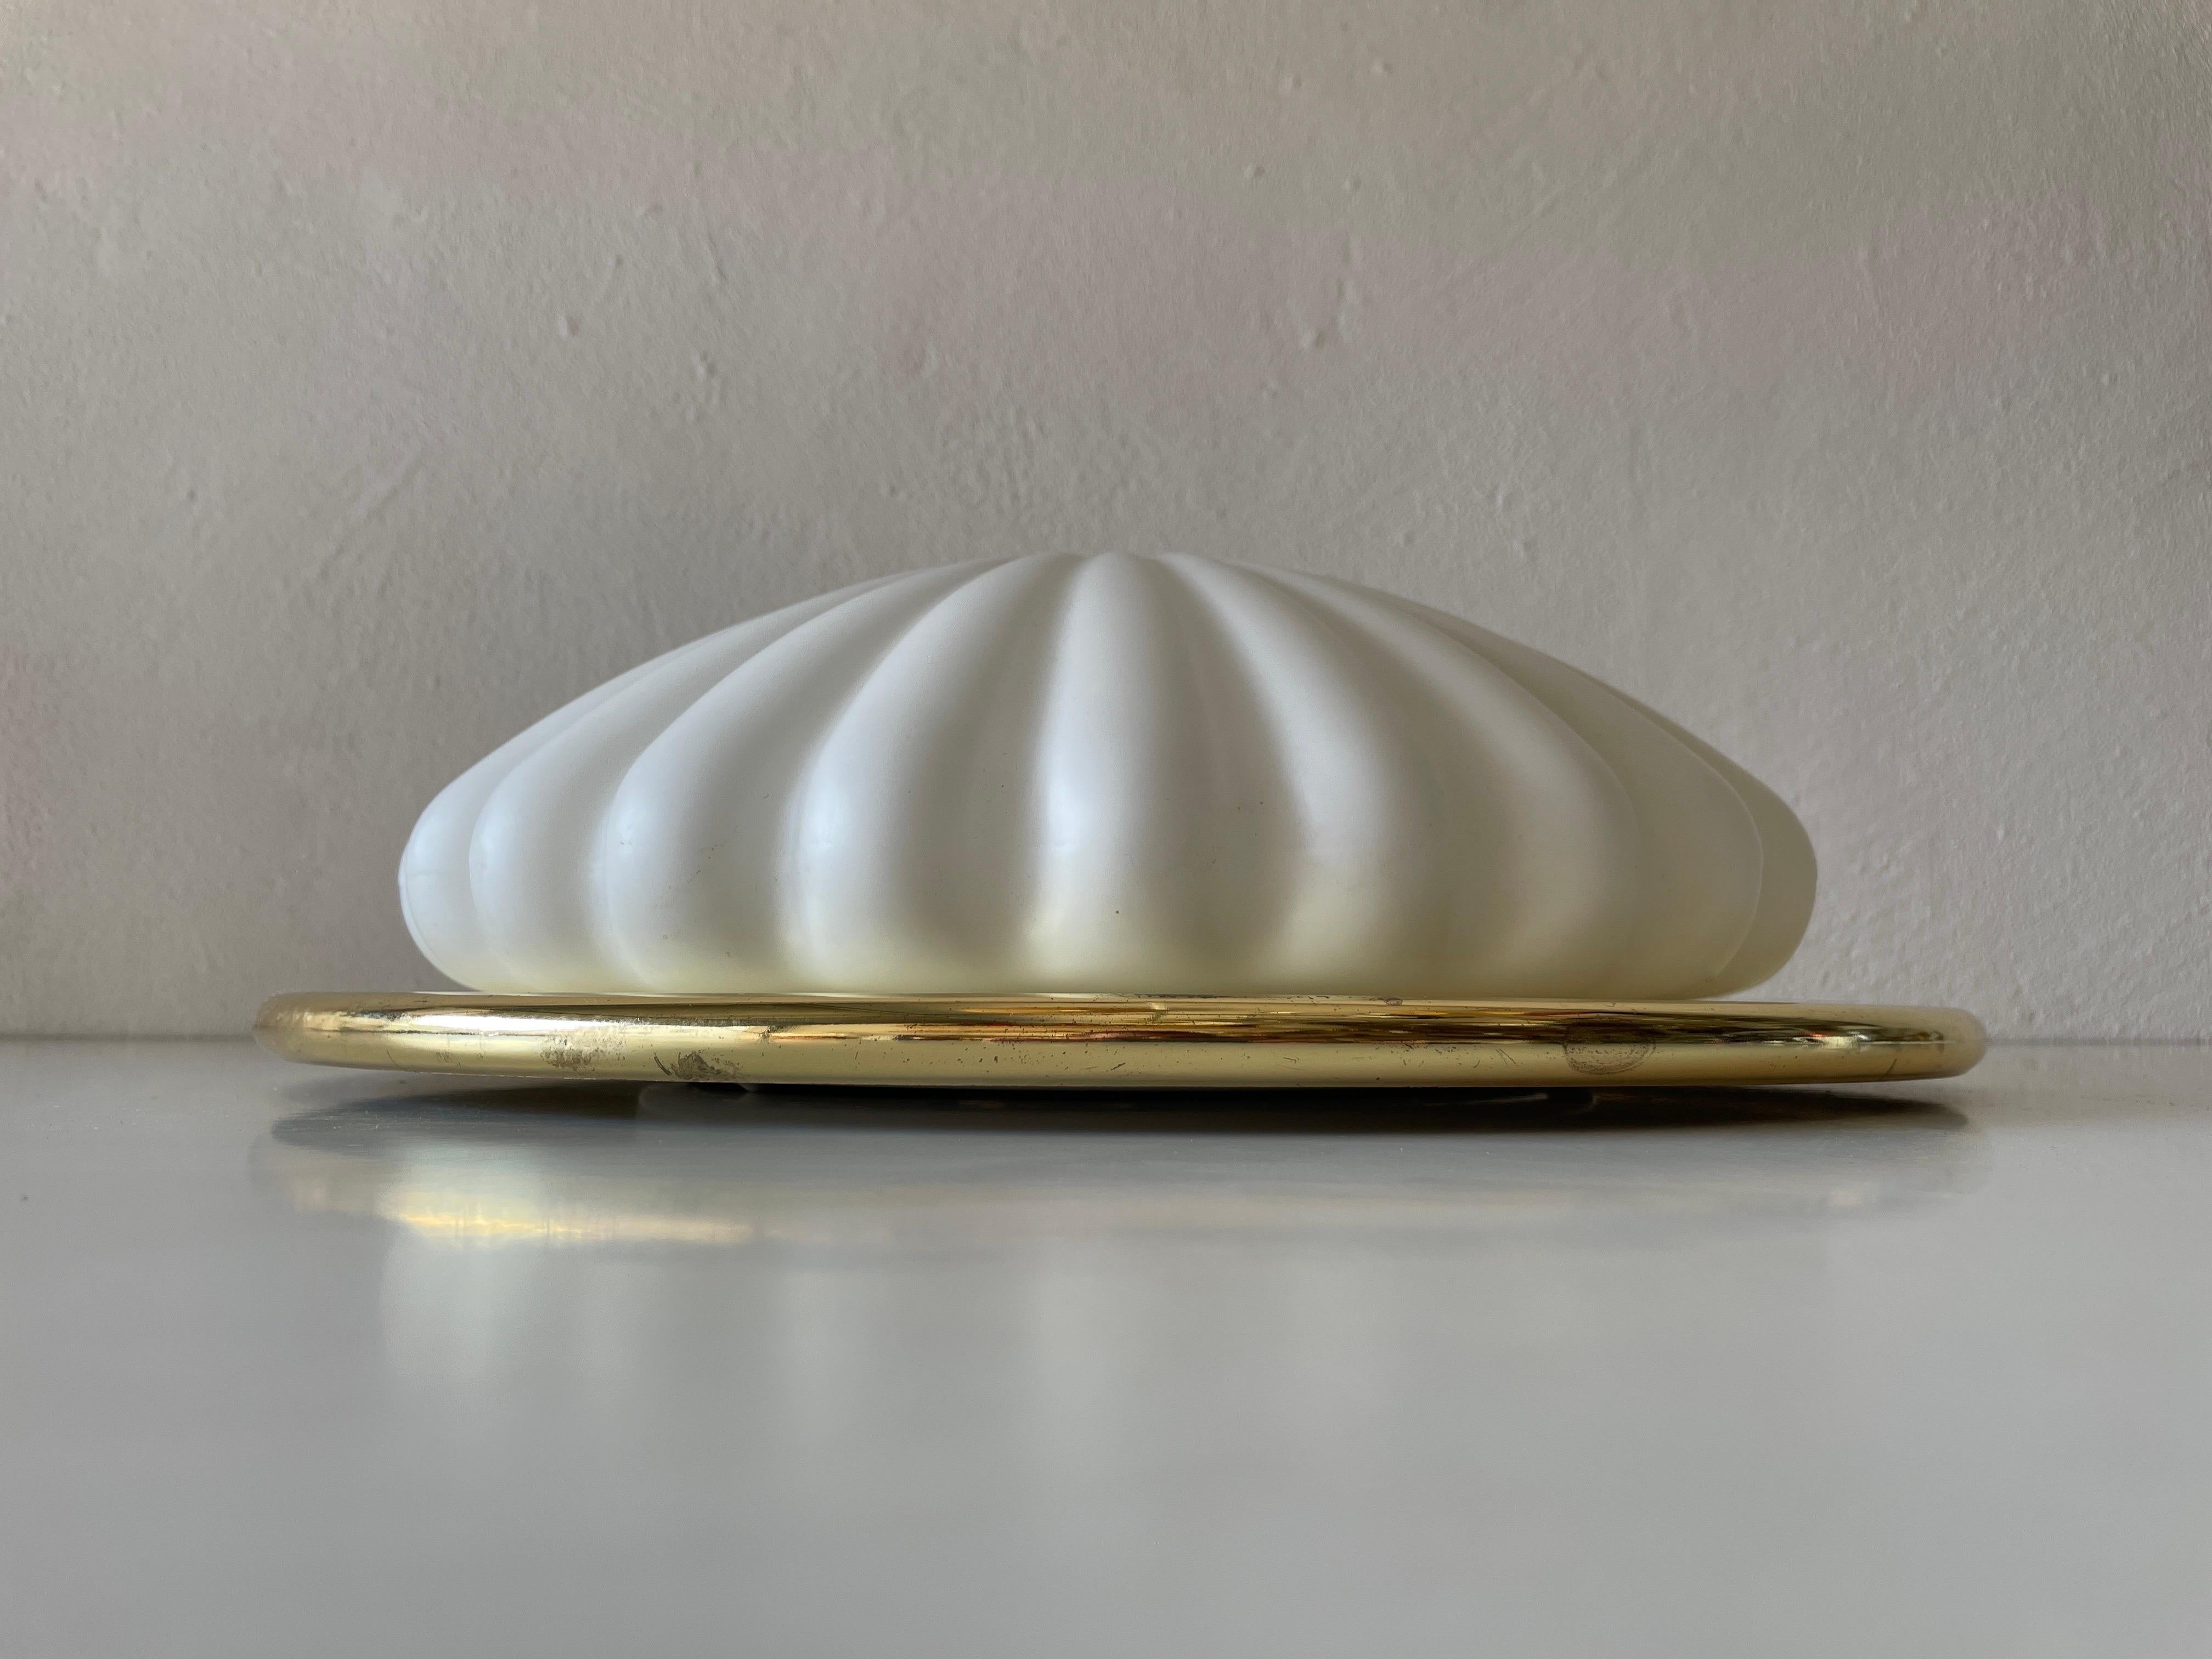 Shell design Glass and Gold metal Large Flush Mount by Peill and Putzler, 1960s, Germany

Sculptural very elegant rare design flush mount. 

It is very ideal and suitable for all living areas.

Lamp is in good condition. No damage, no crack.
Wear